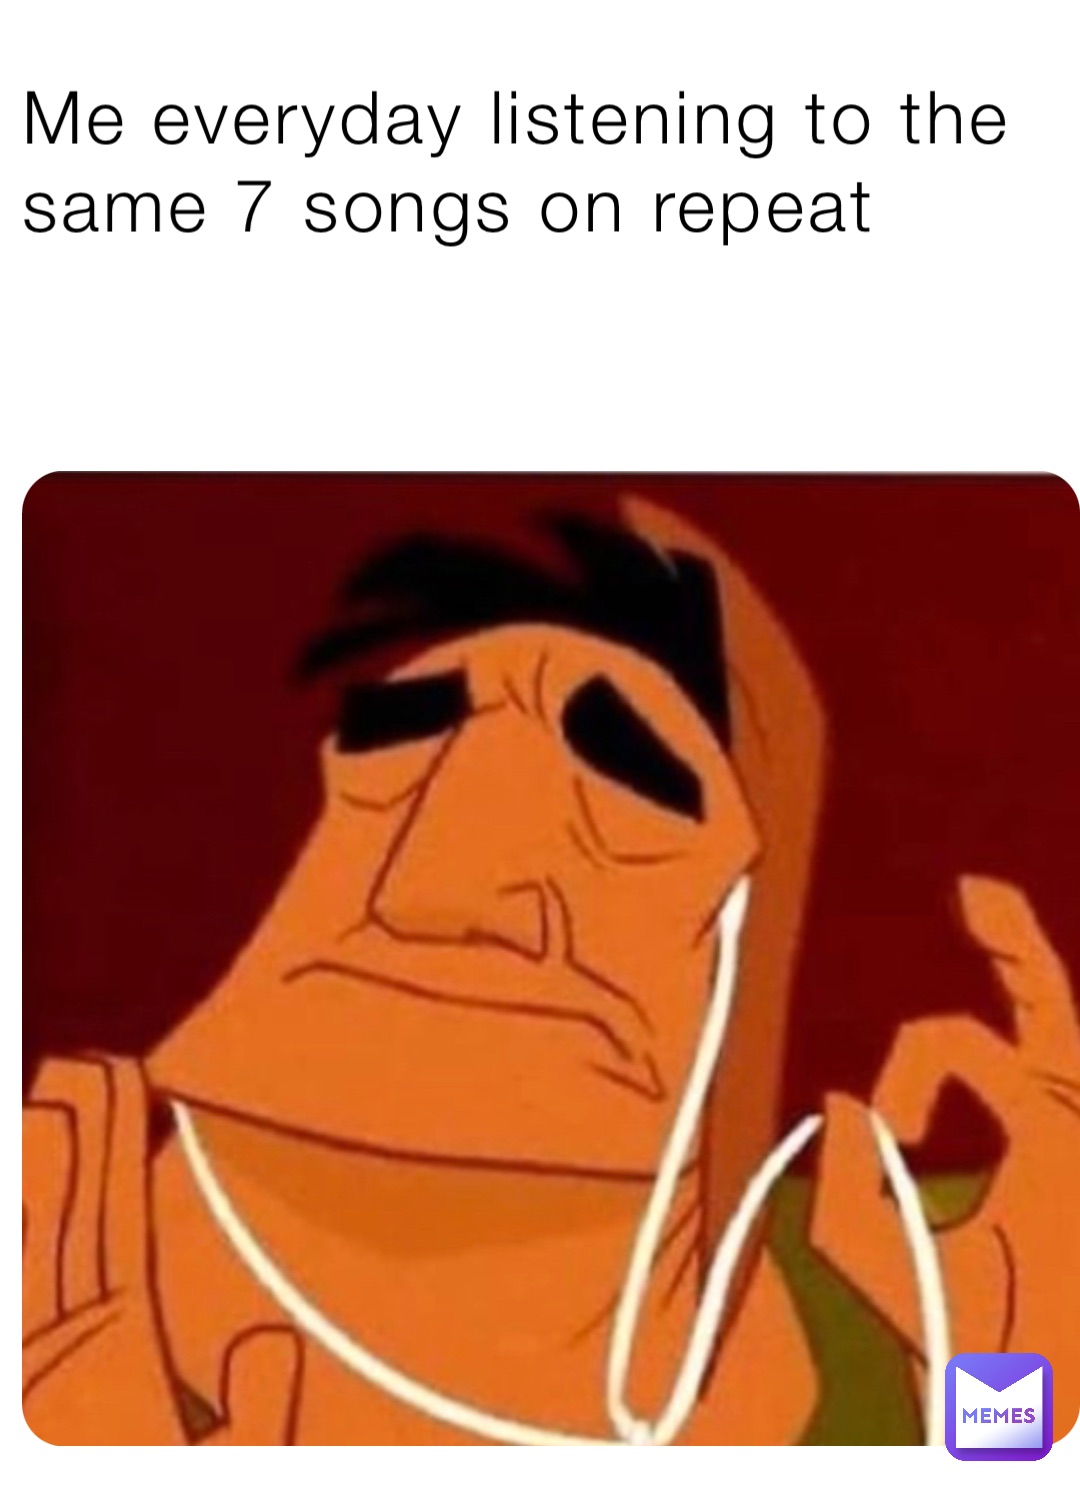 Me everyday listening to the same 7 songs on repeat | @Memes_by_mee | Memes